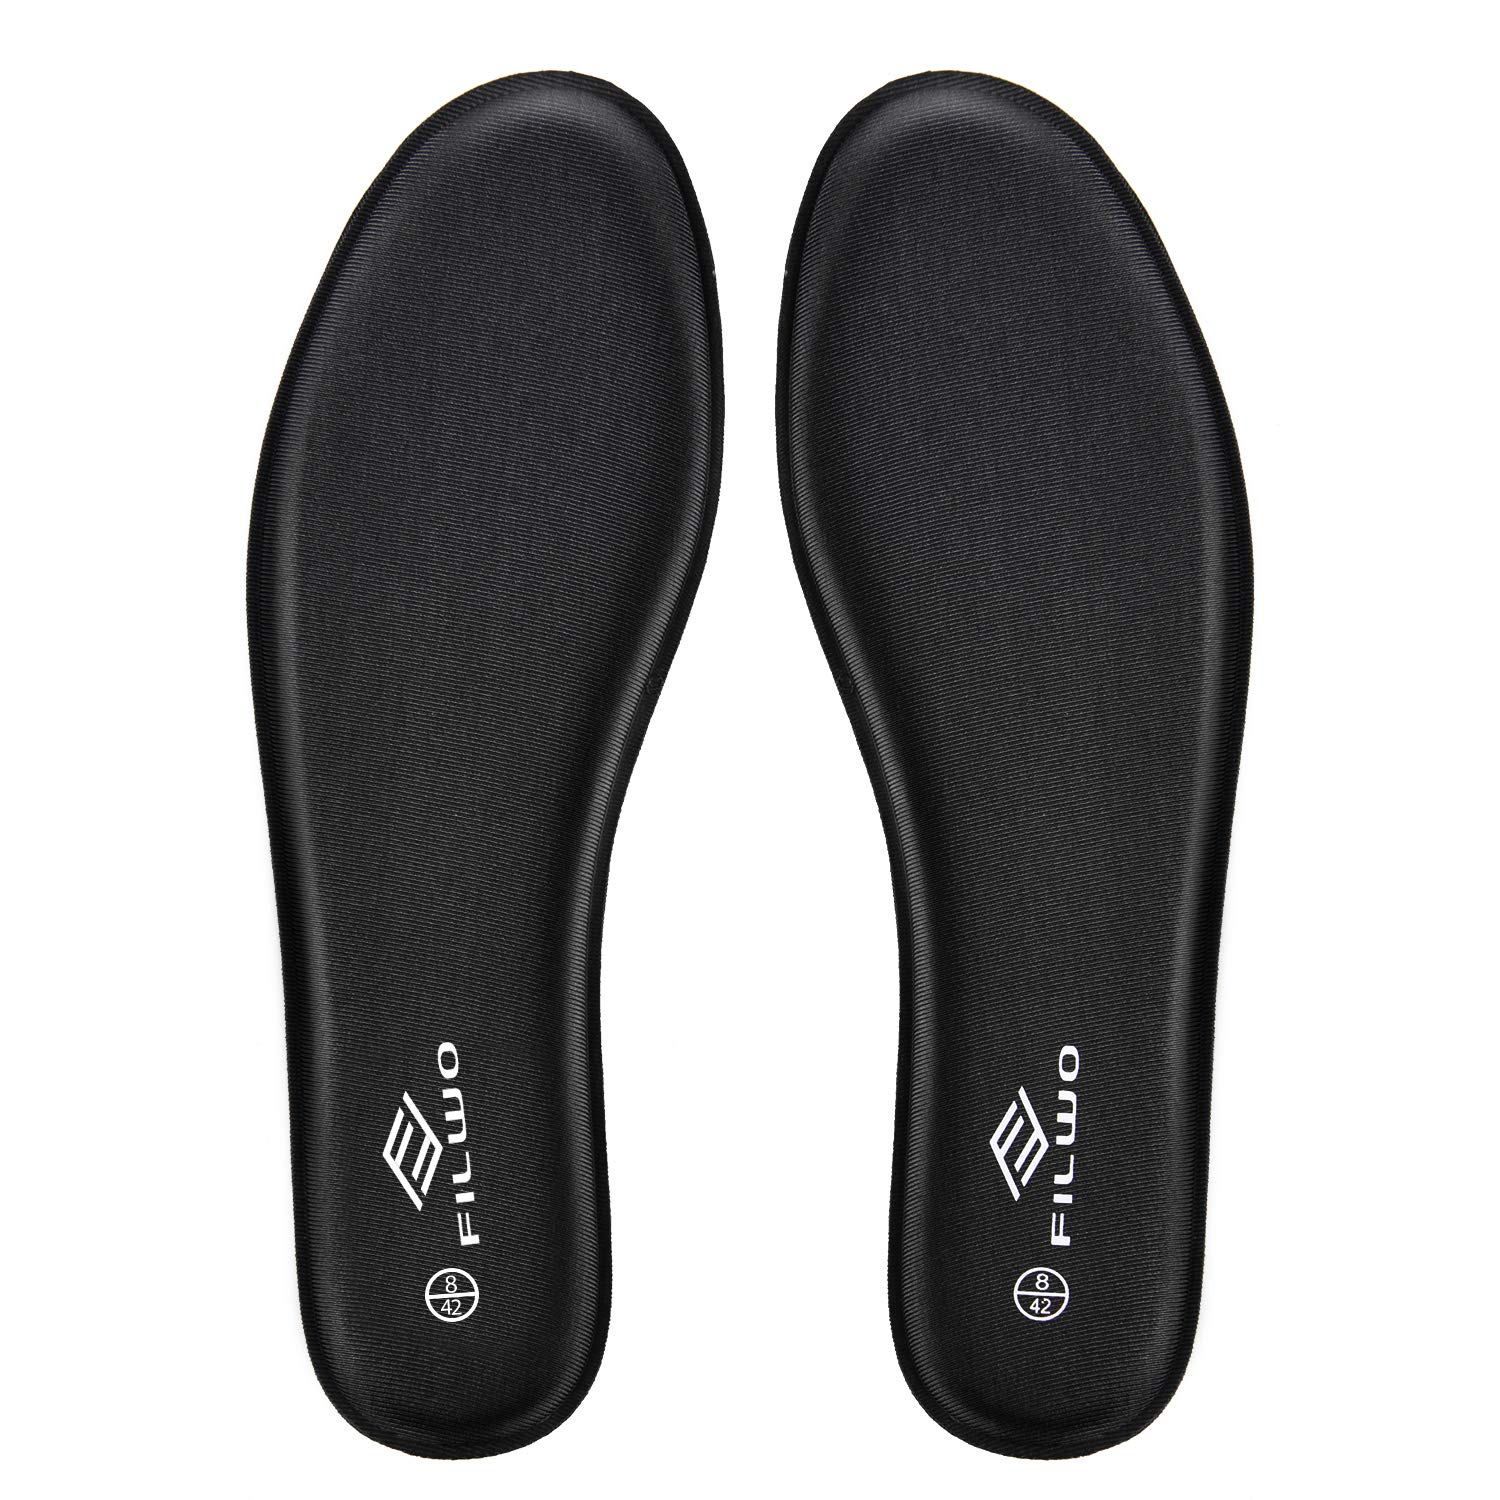 FILWO Women's Men's Memory Foam Insoles, Replacement Shoe Inserts for Sports Shoes, Trainers, Sneakers, Walking Boots, Work Shoes